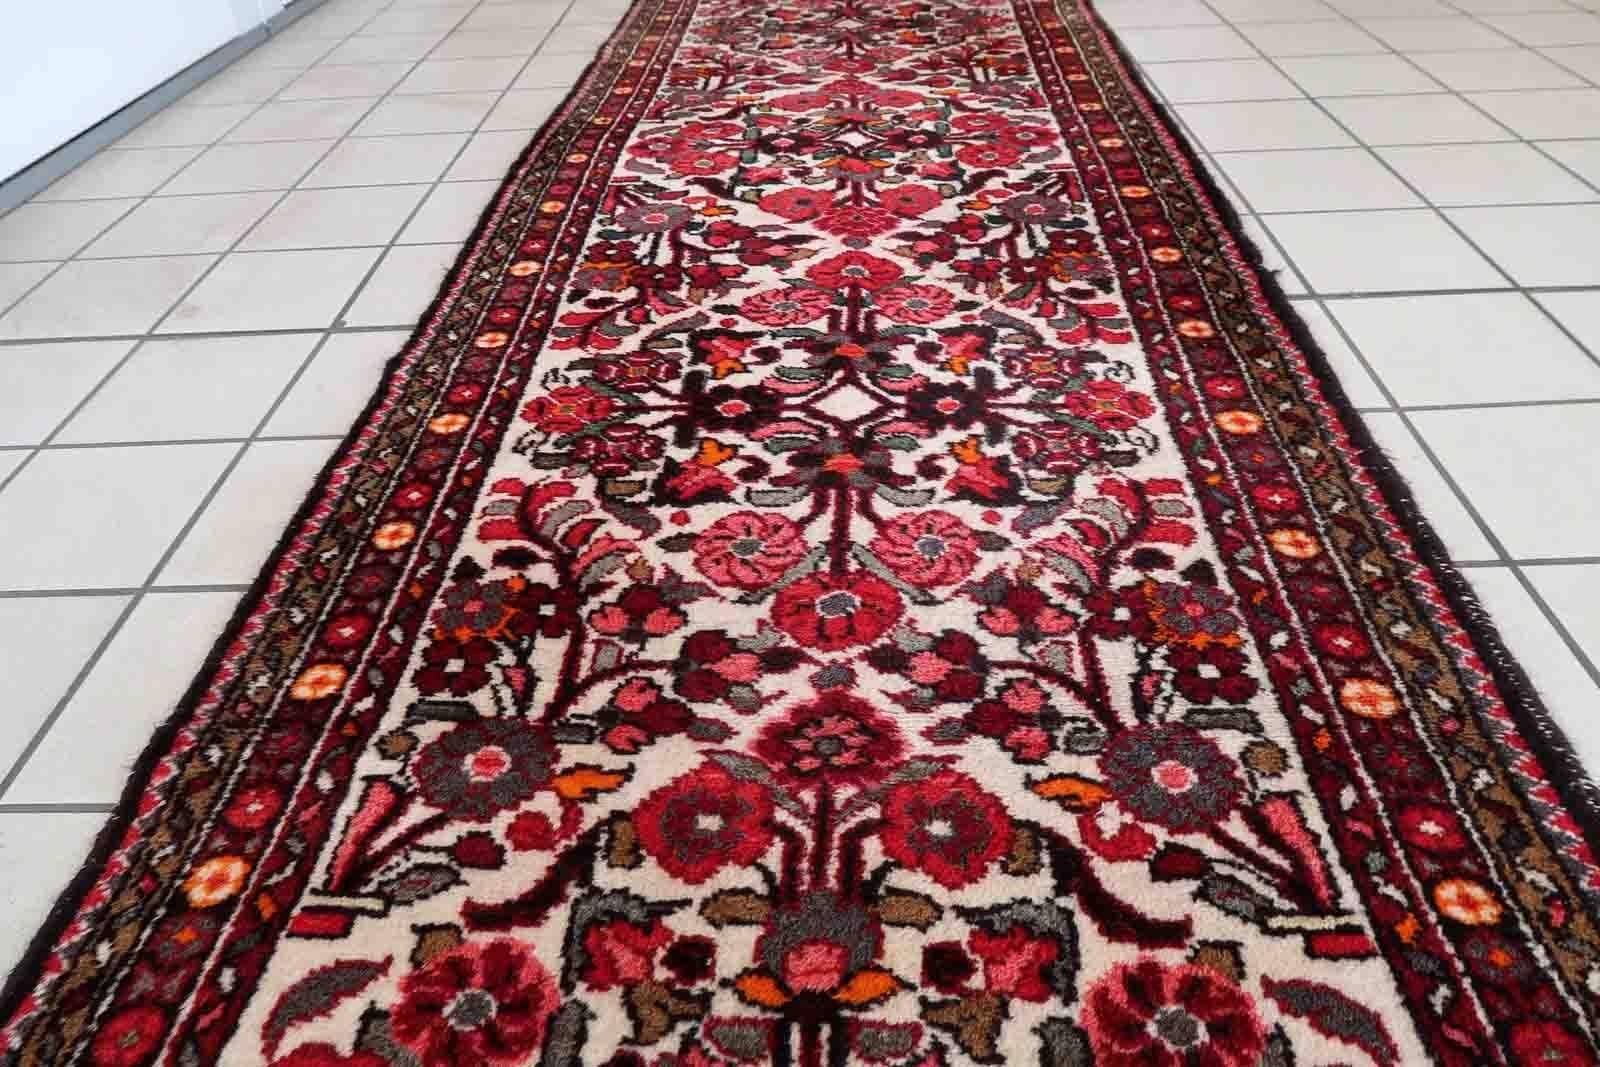 Handmade antique Malayer runner in floral design. The runner is from the beginning of 20th century in original good condition.

-condition: original good,

-circa: 1930s,

-size: 2.8' x 8.8' (87cm x 270cm),

-material: wool,

-country of